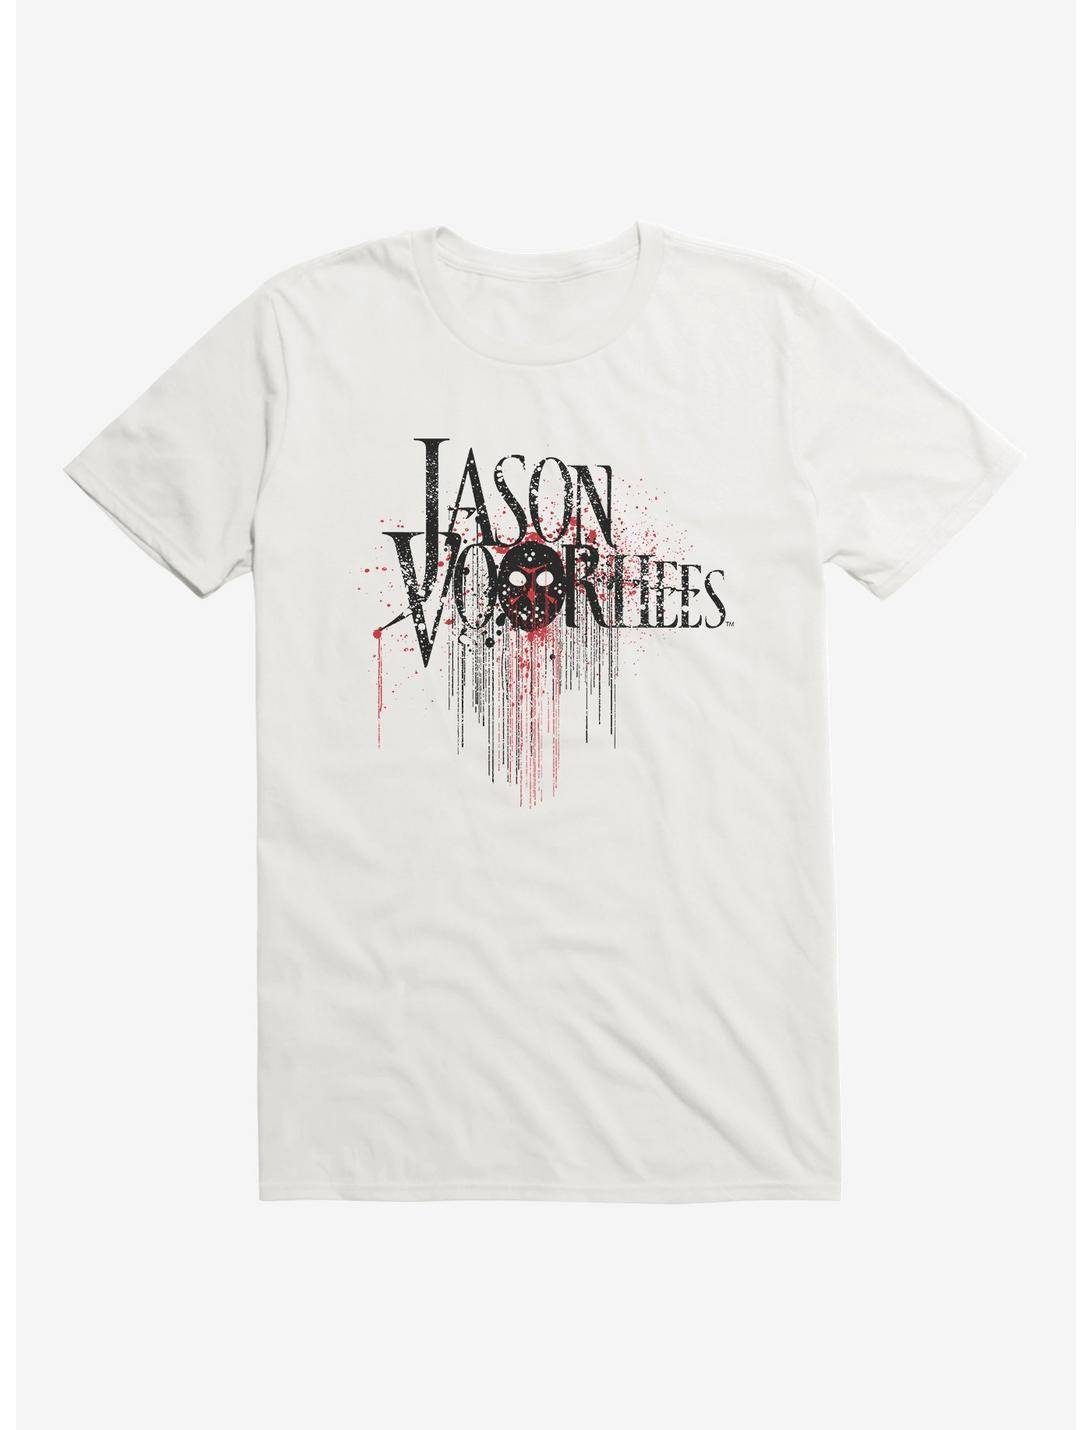 Friday The 13th Jason Voorhees T-Shirt, WHITE, hi-res